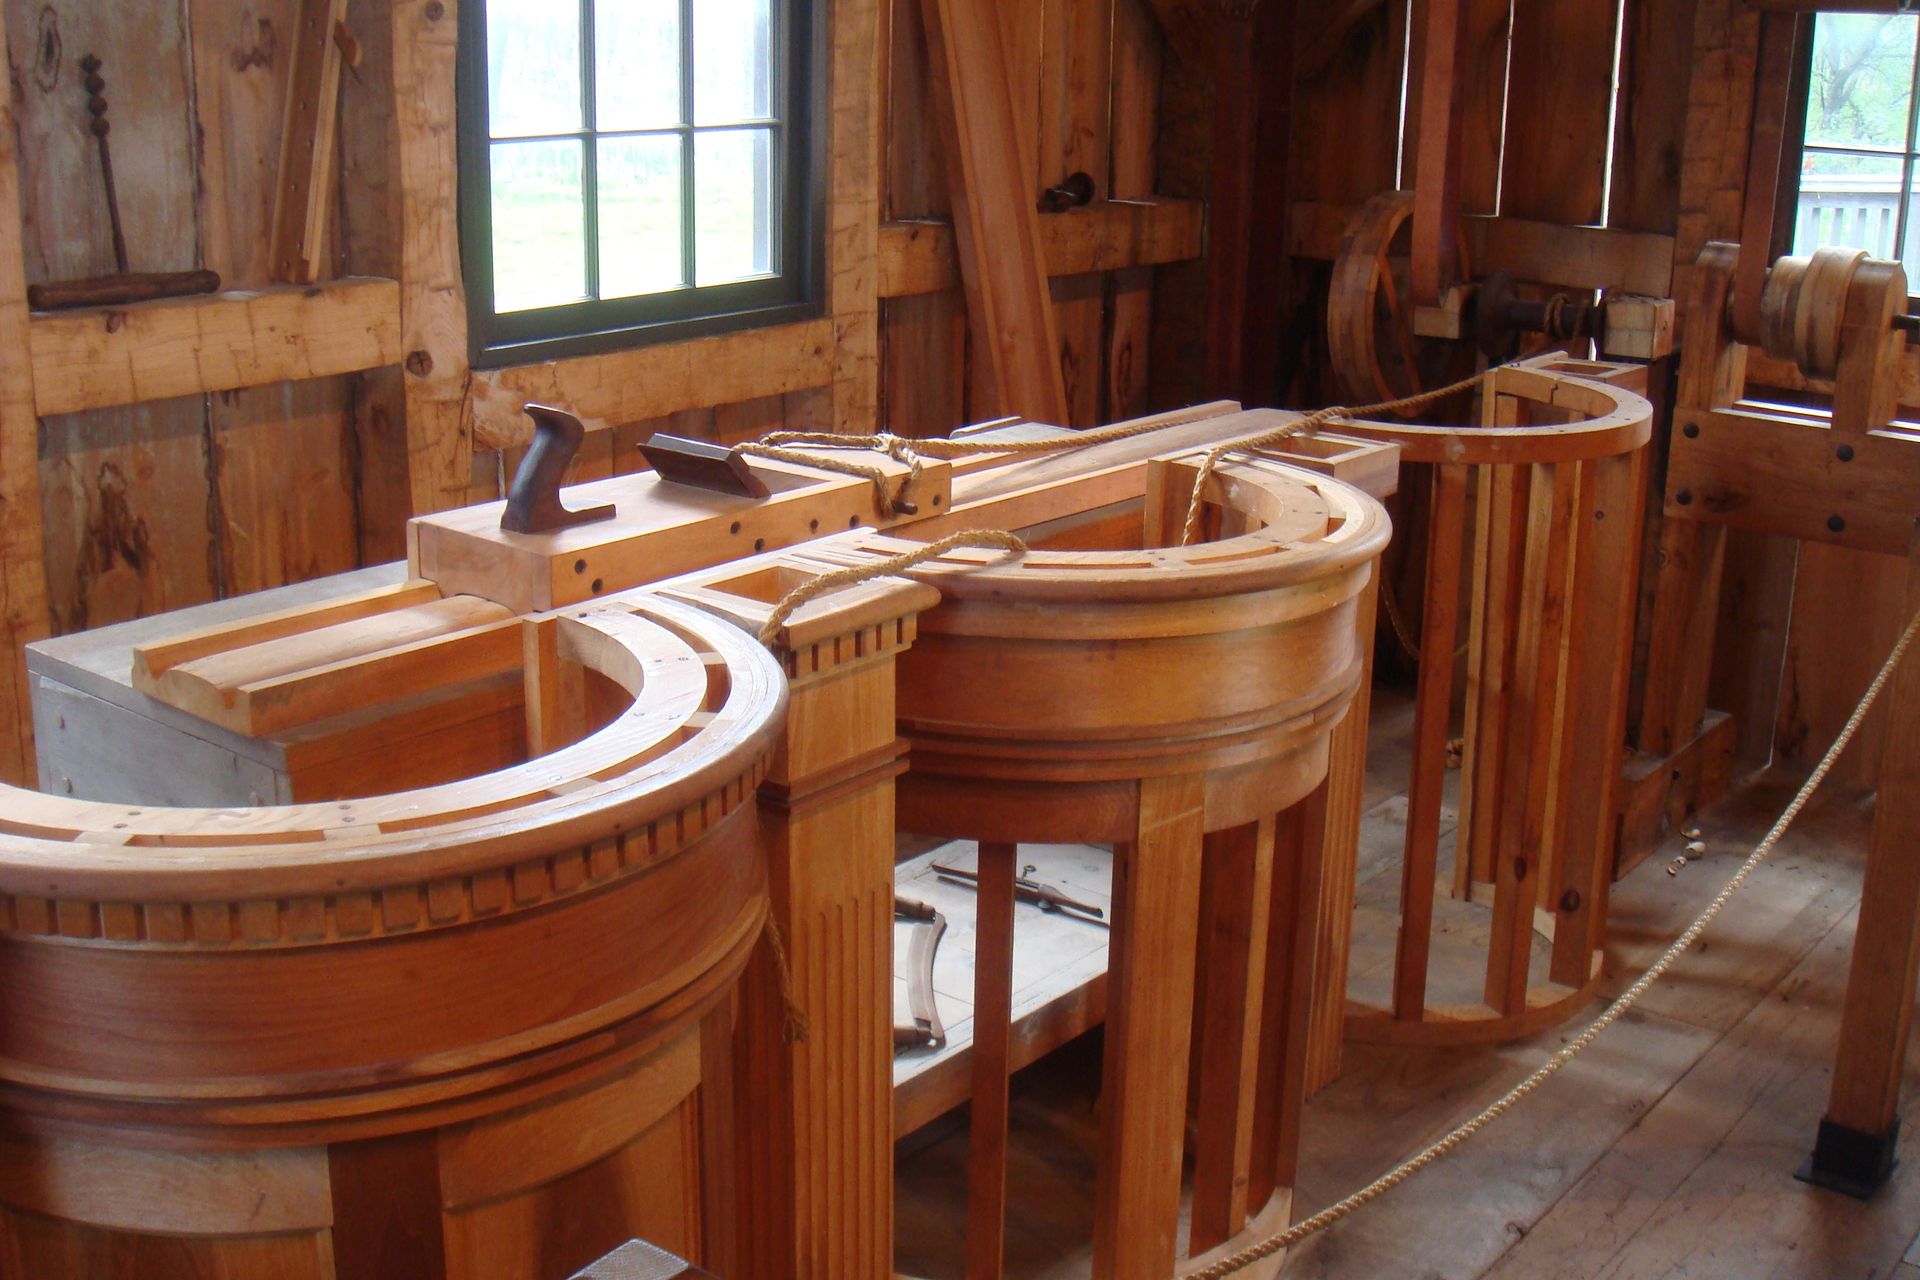 The Kirtland Temple pews under construction.